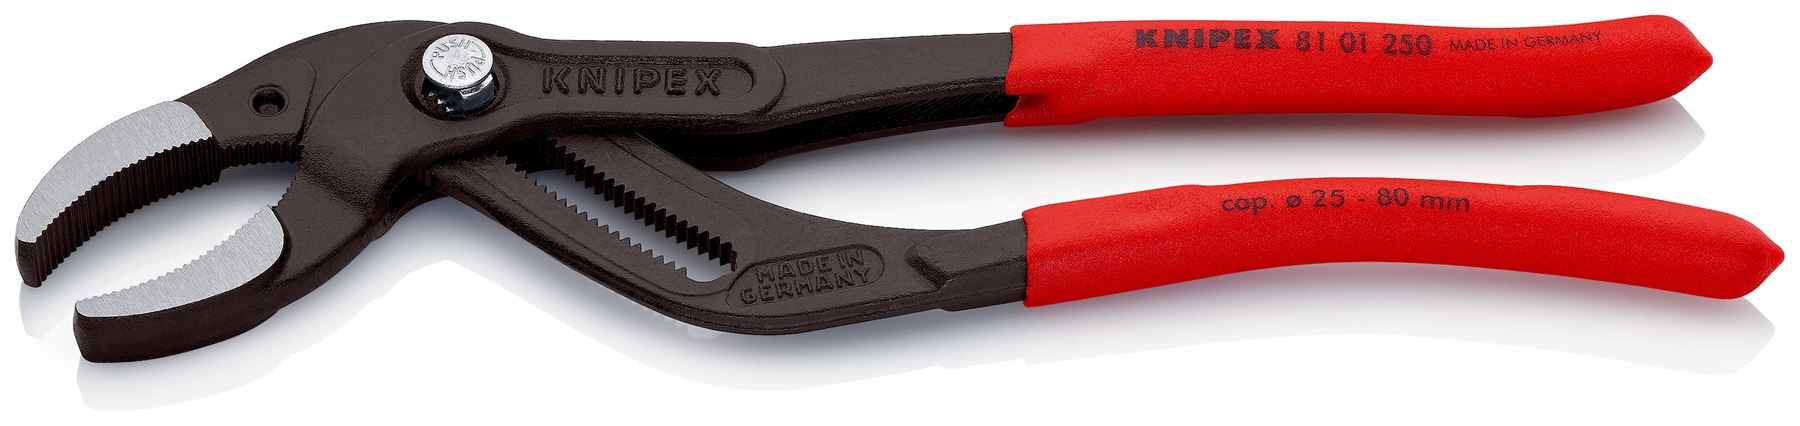 Knipex Siphon and Connector Water Pump Pliers 250mm 81 01 250